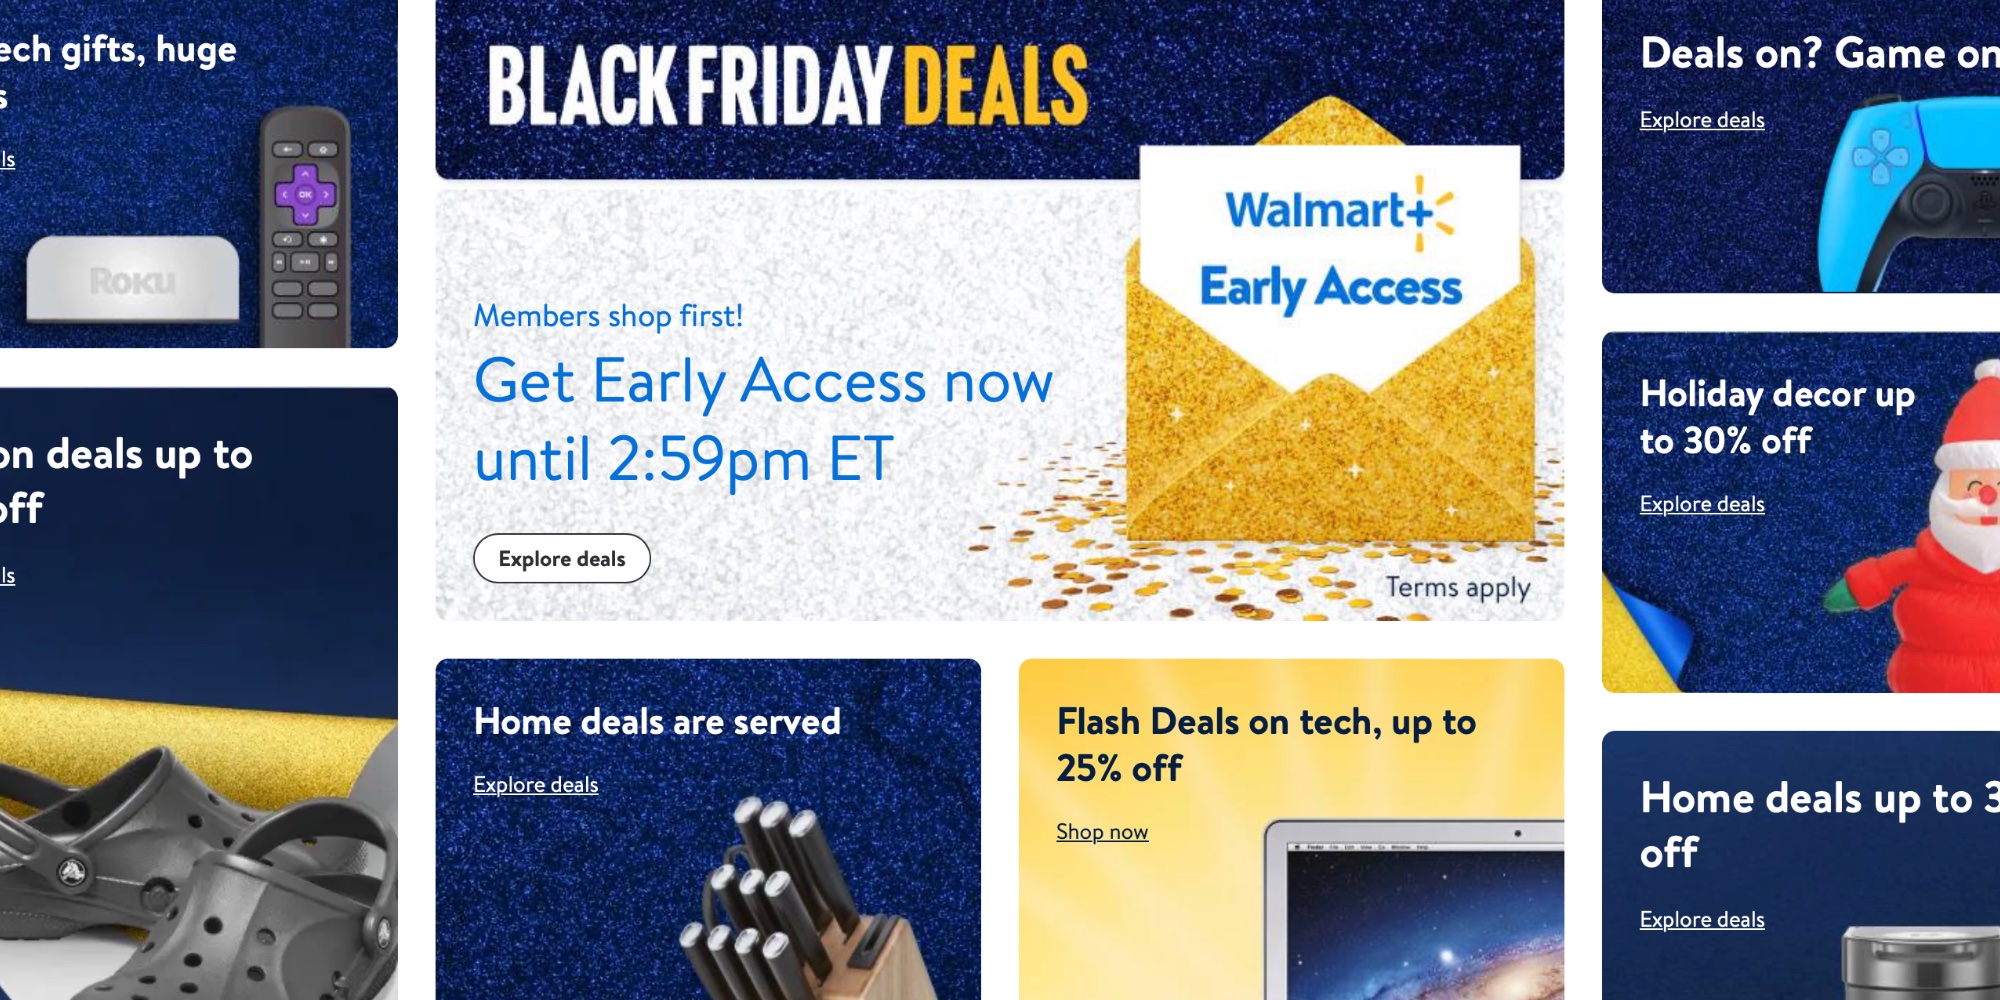 See the Thanksgiving deals in Walmart's last Black Friday ad